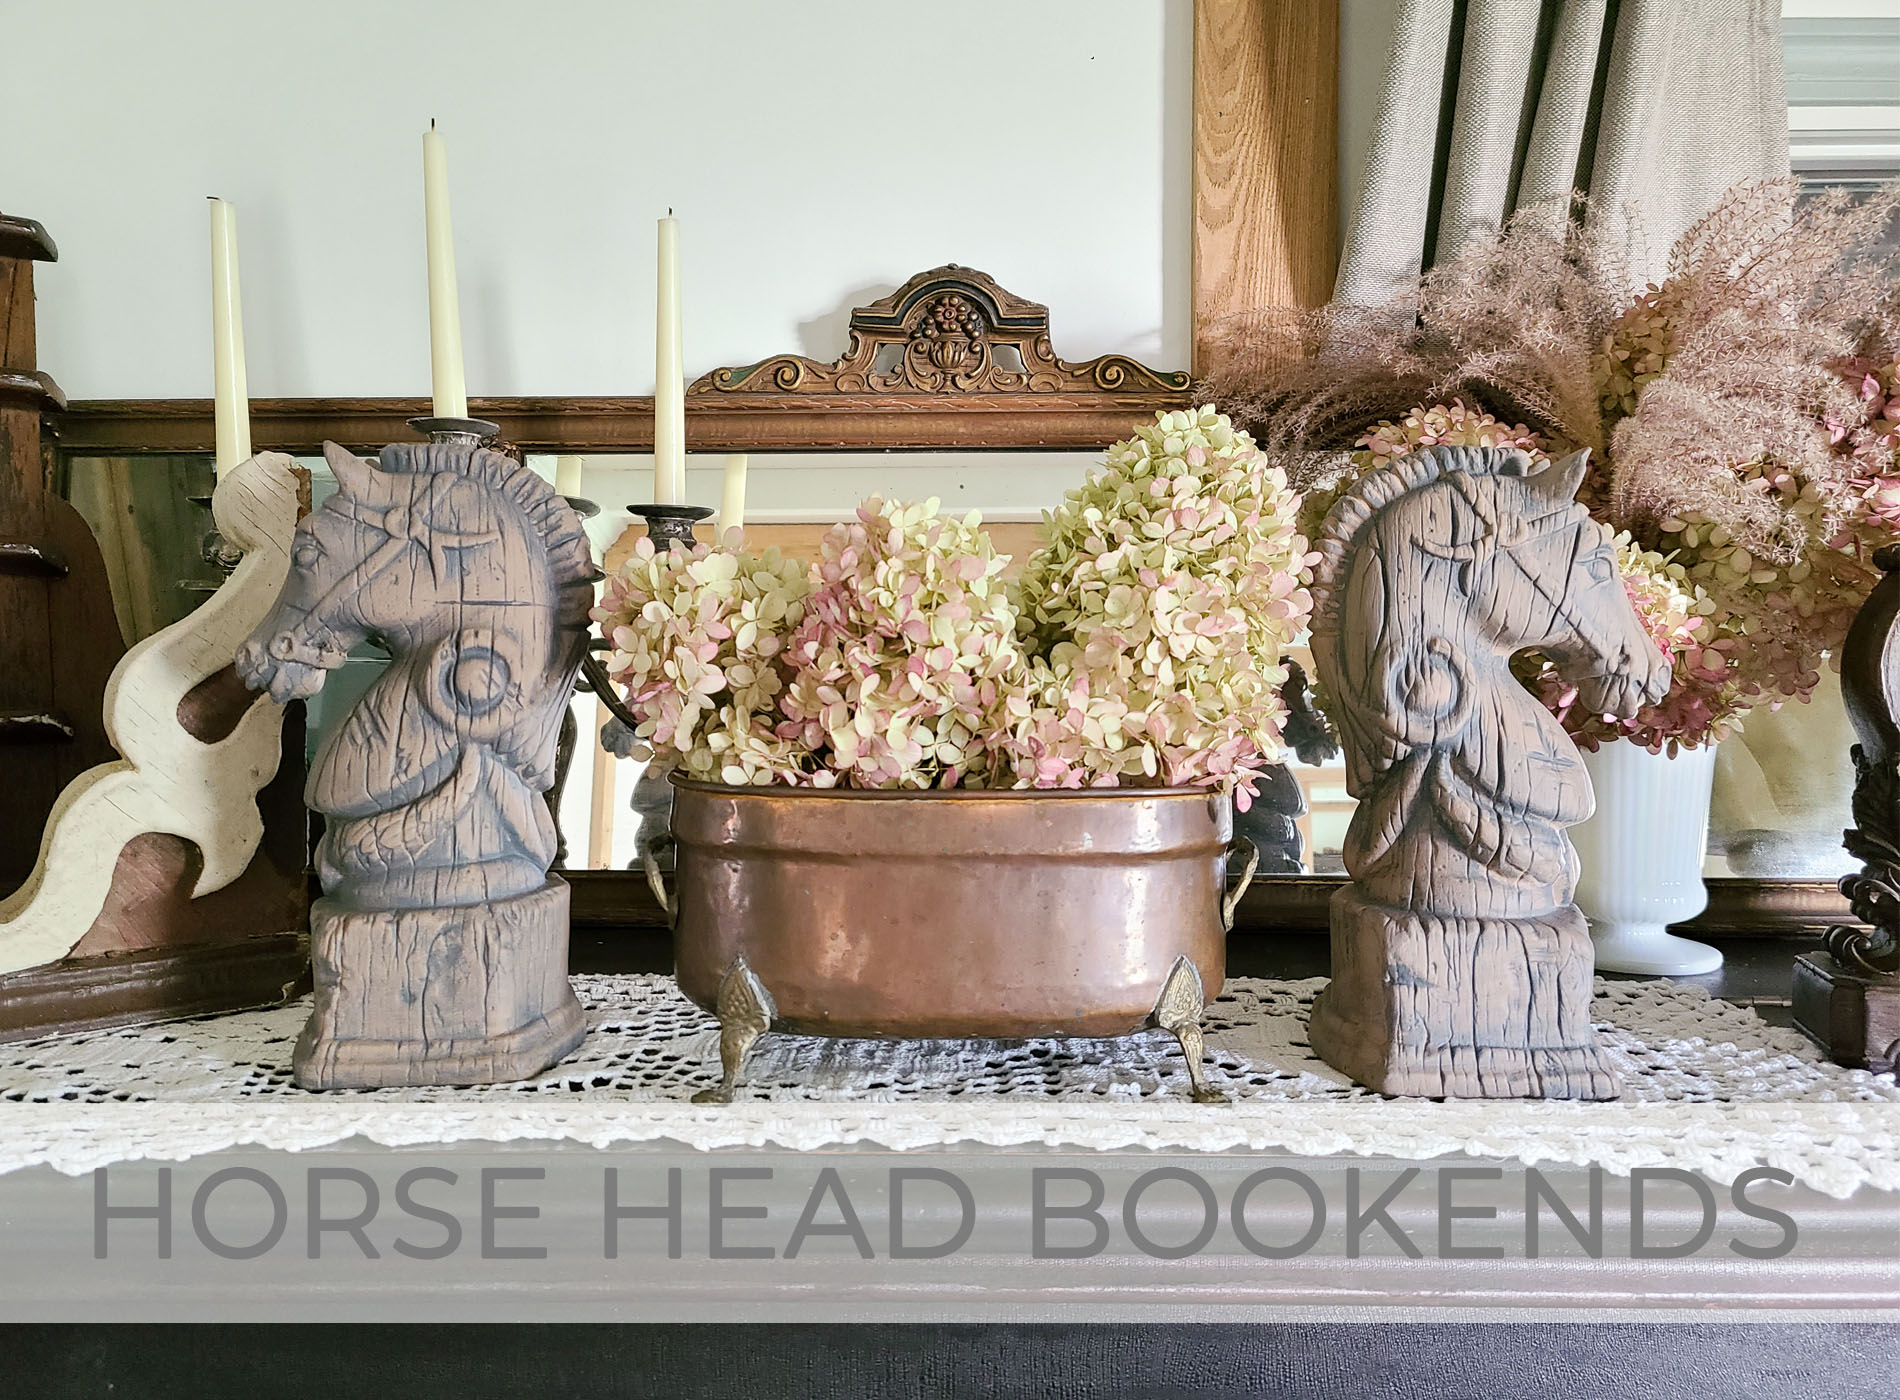 Vintage Horse Head Bookends Makeover by Larissa of Prodigal Pieces | prodigalpieces.com